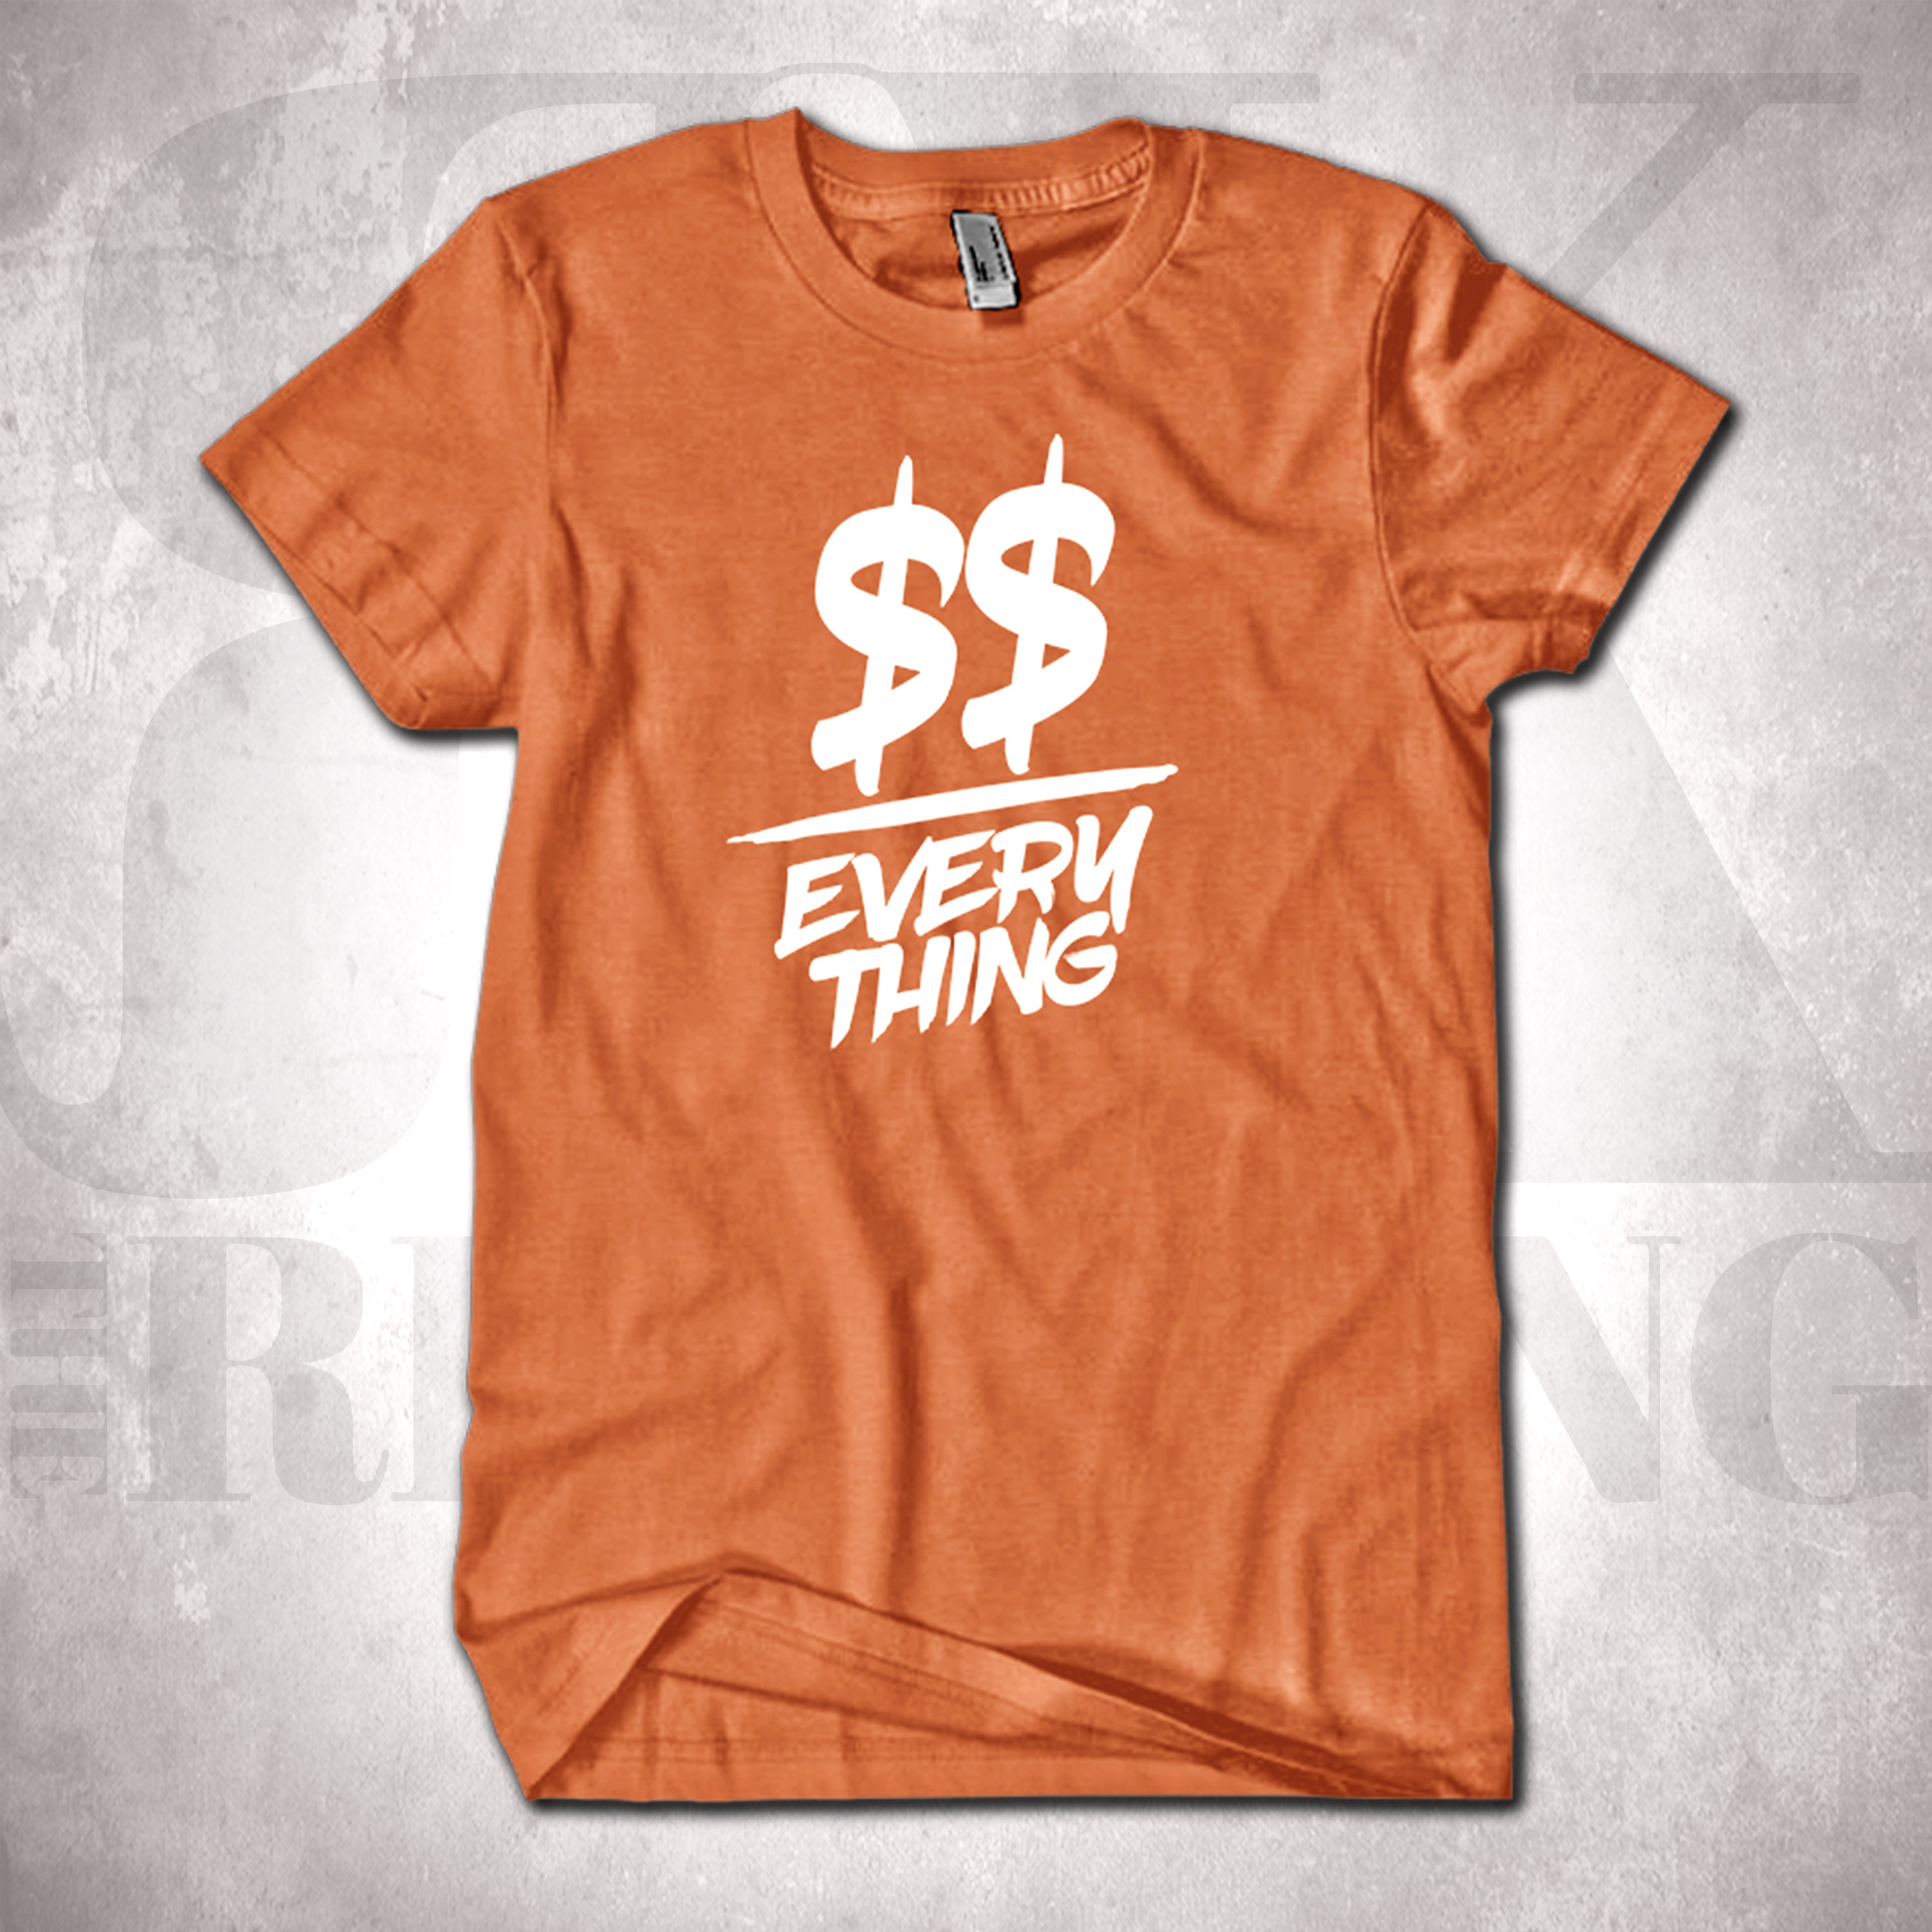 Money Over Everything: A Hustlers Motto (White Logo)